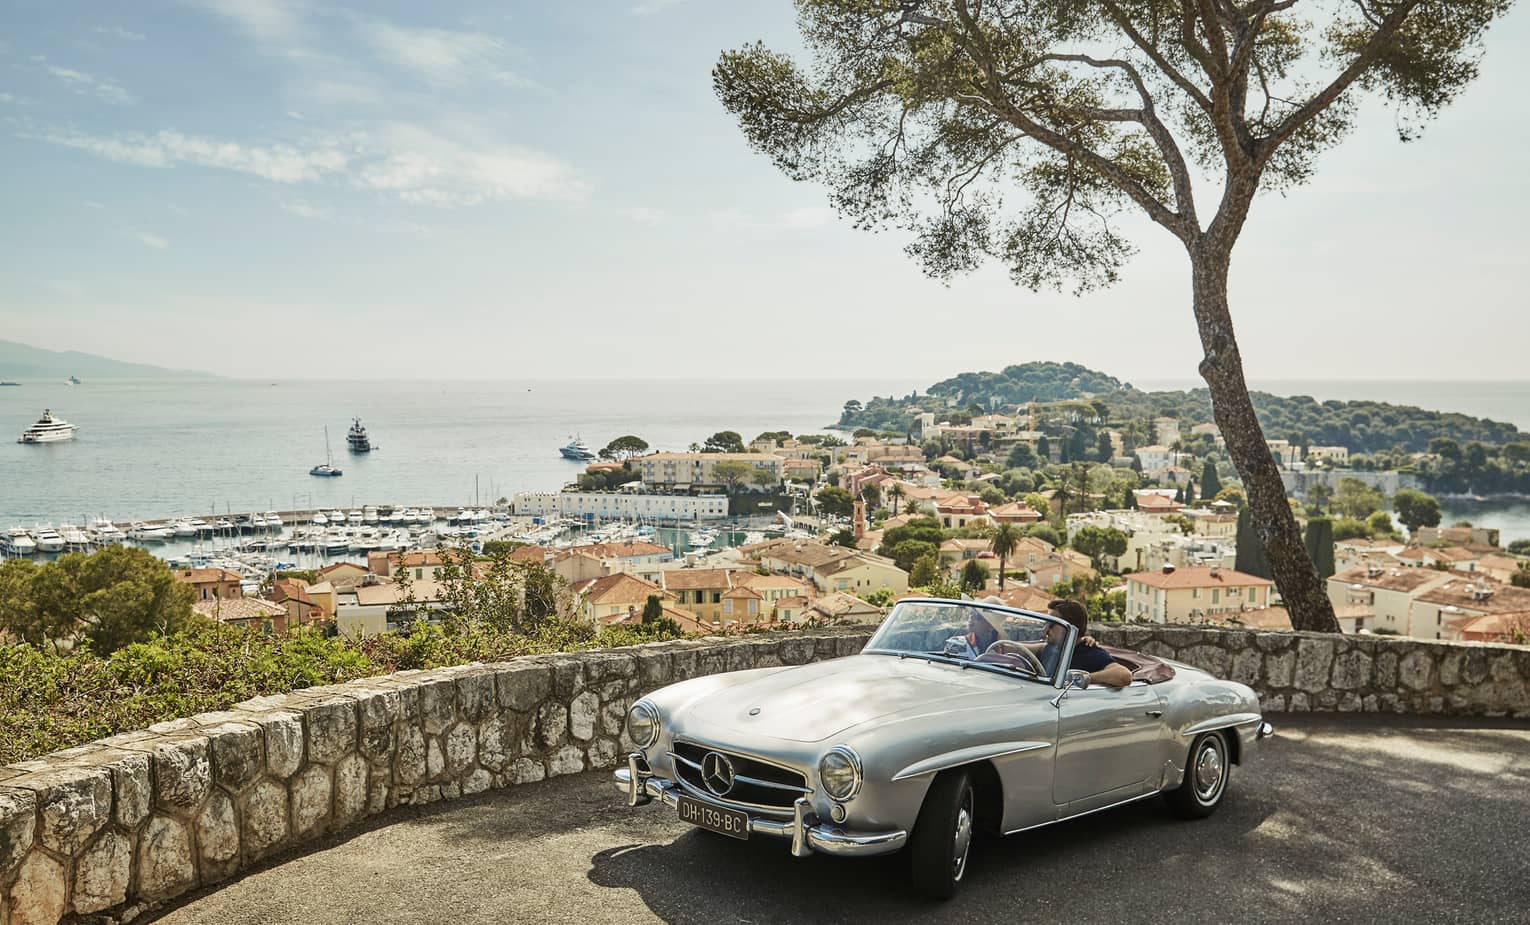 Couple in luxury vintage white car parked under tree by stone wall overlooking red roofs, water